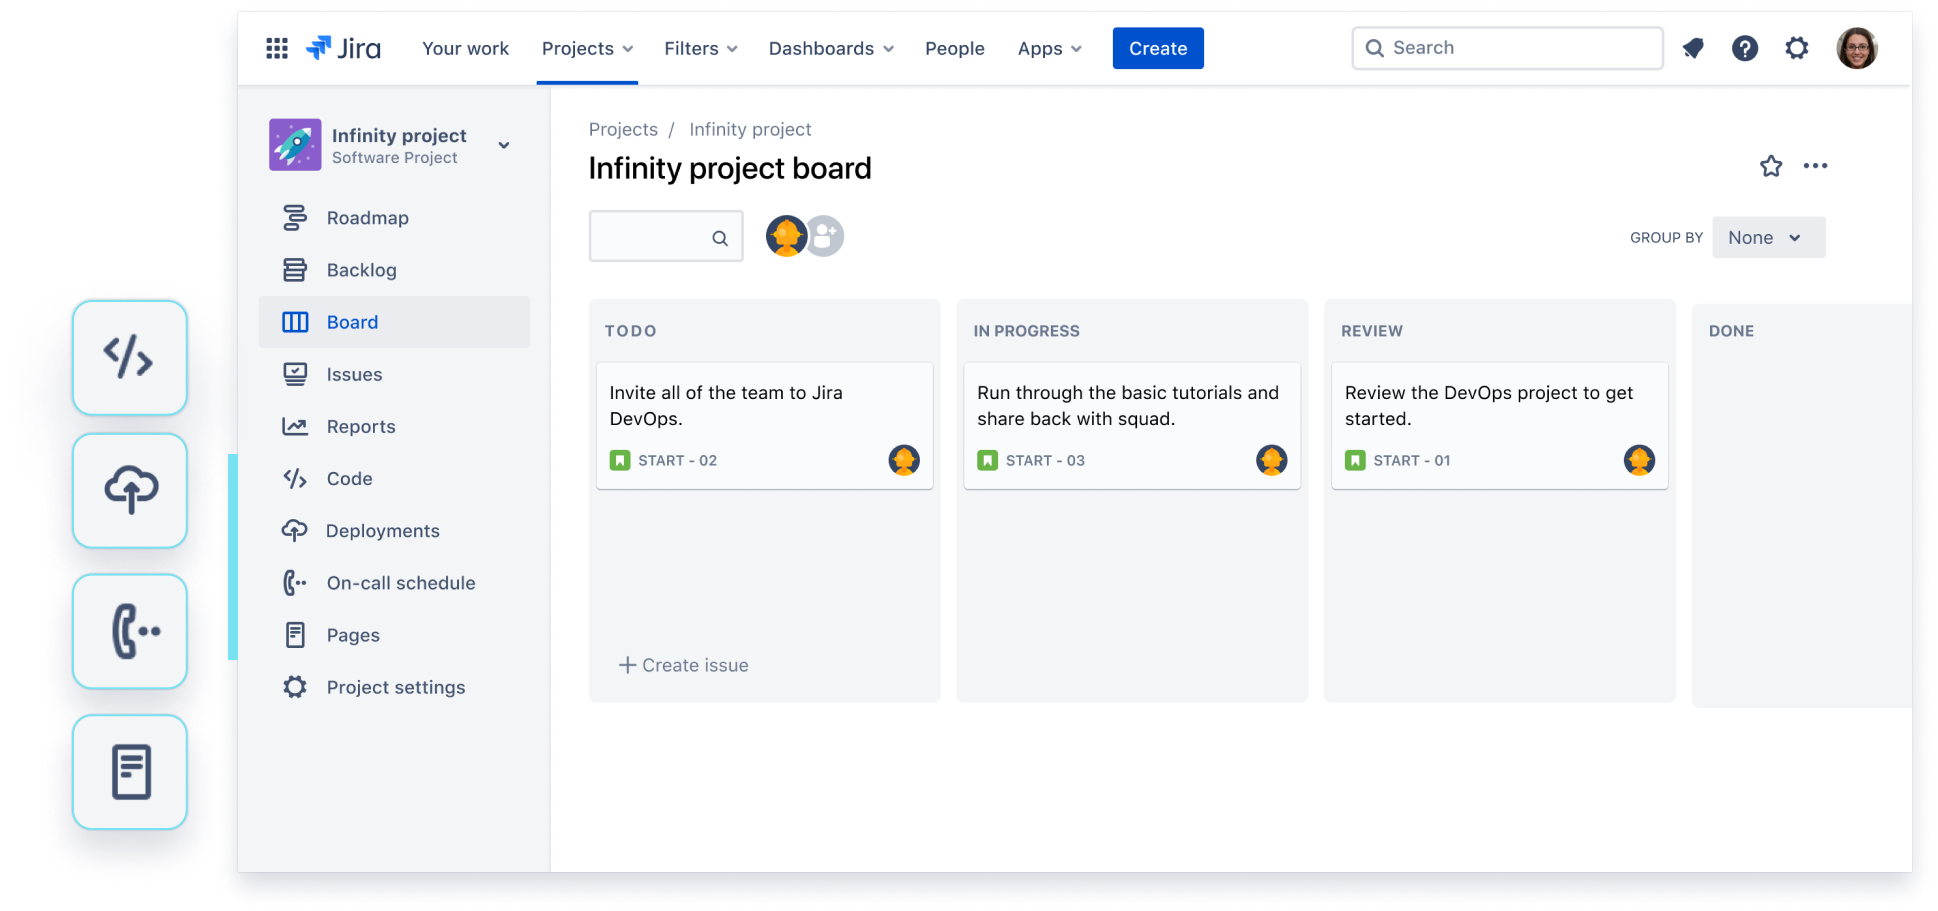 Open DevOps Software - Open DevOps is powered by Jira Software, the #1 tool used by agile teams. Teams can focus on building and operating software while Open DevOps integrates Atlassian and partner tools auBring your existing tools or swap out our tools with just a few clicks.